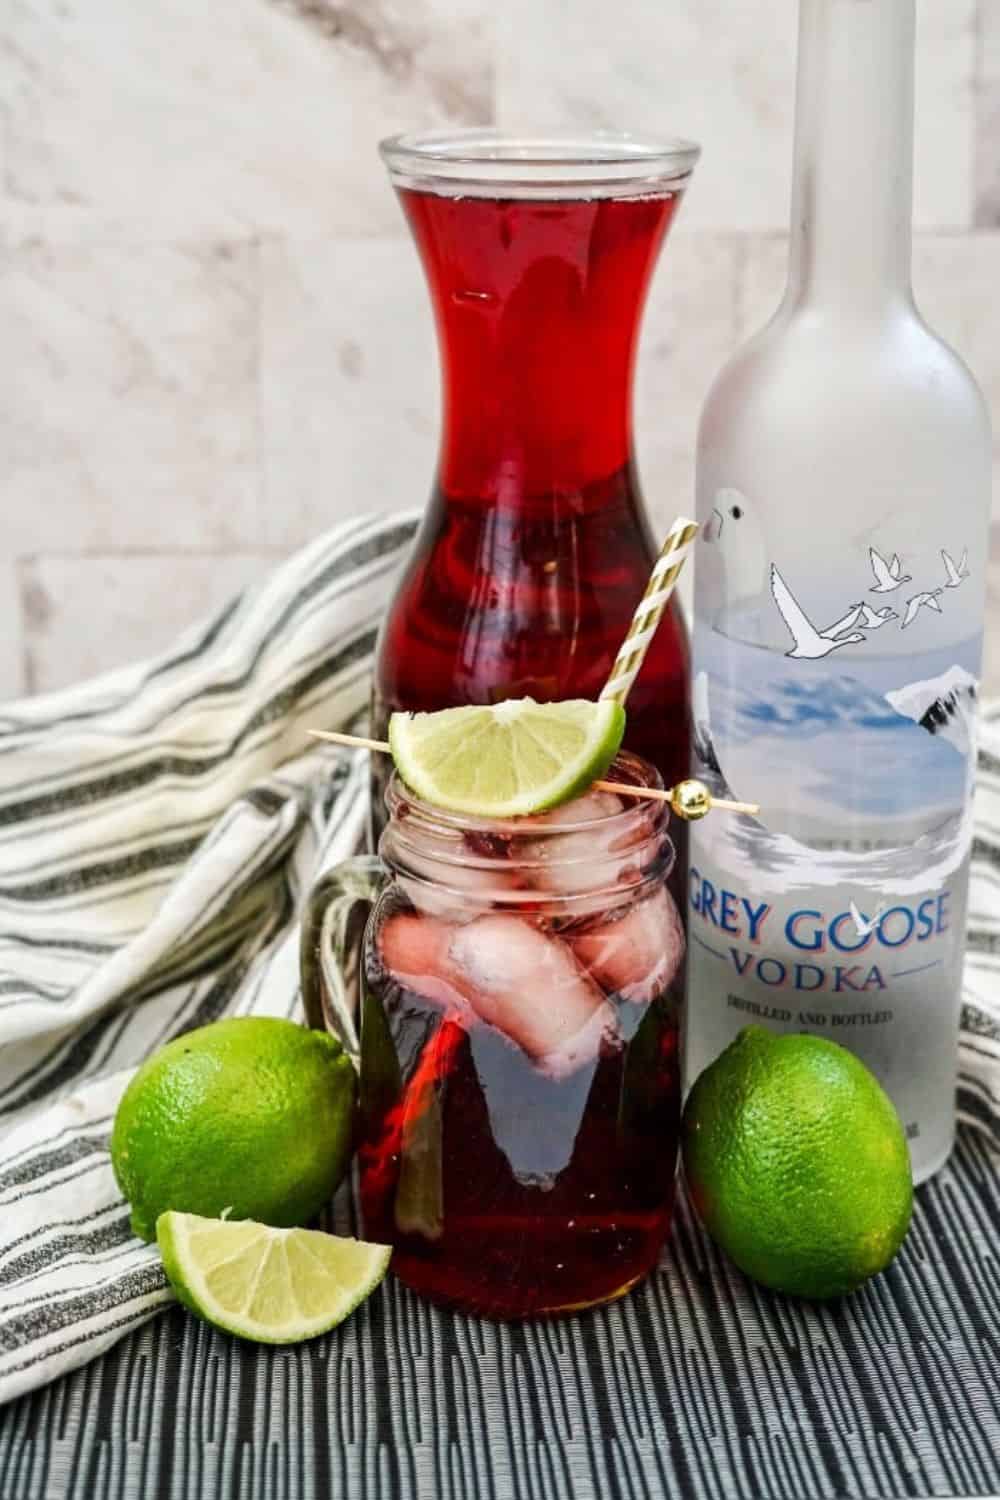 The Cape Codder drink is commonly known as Vodka Cranberry cocktail